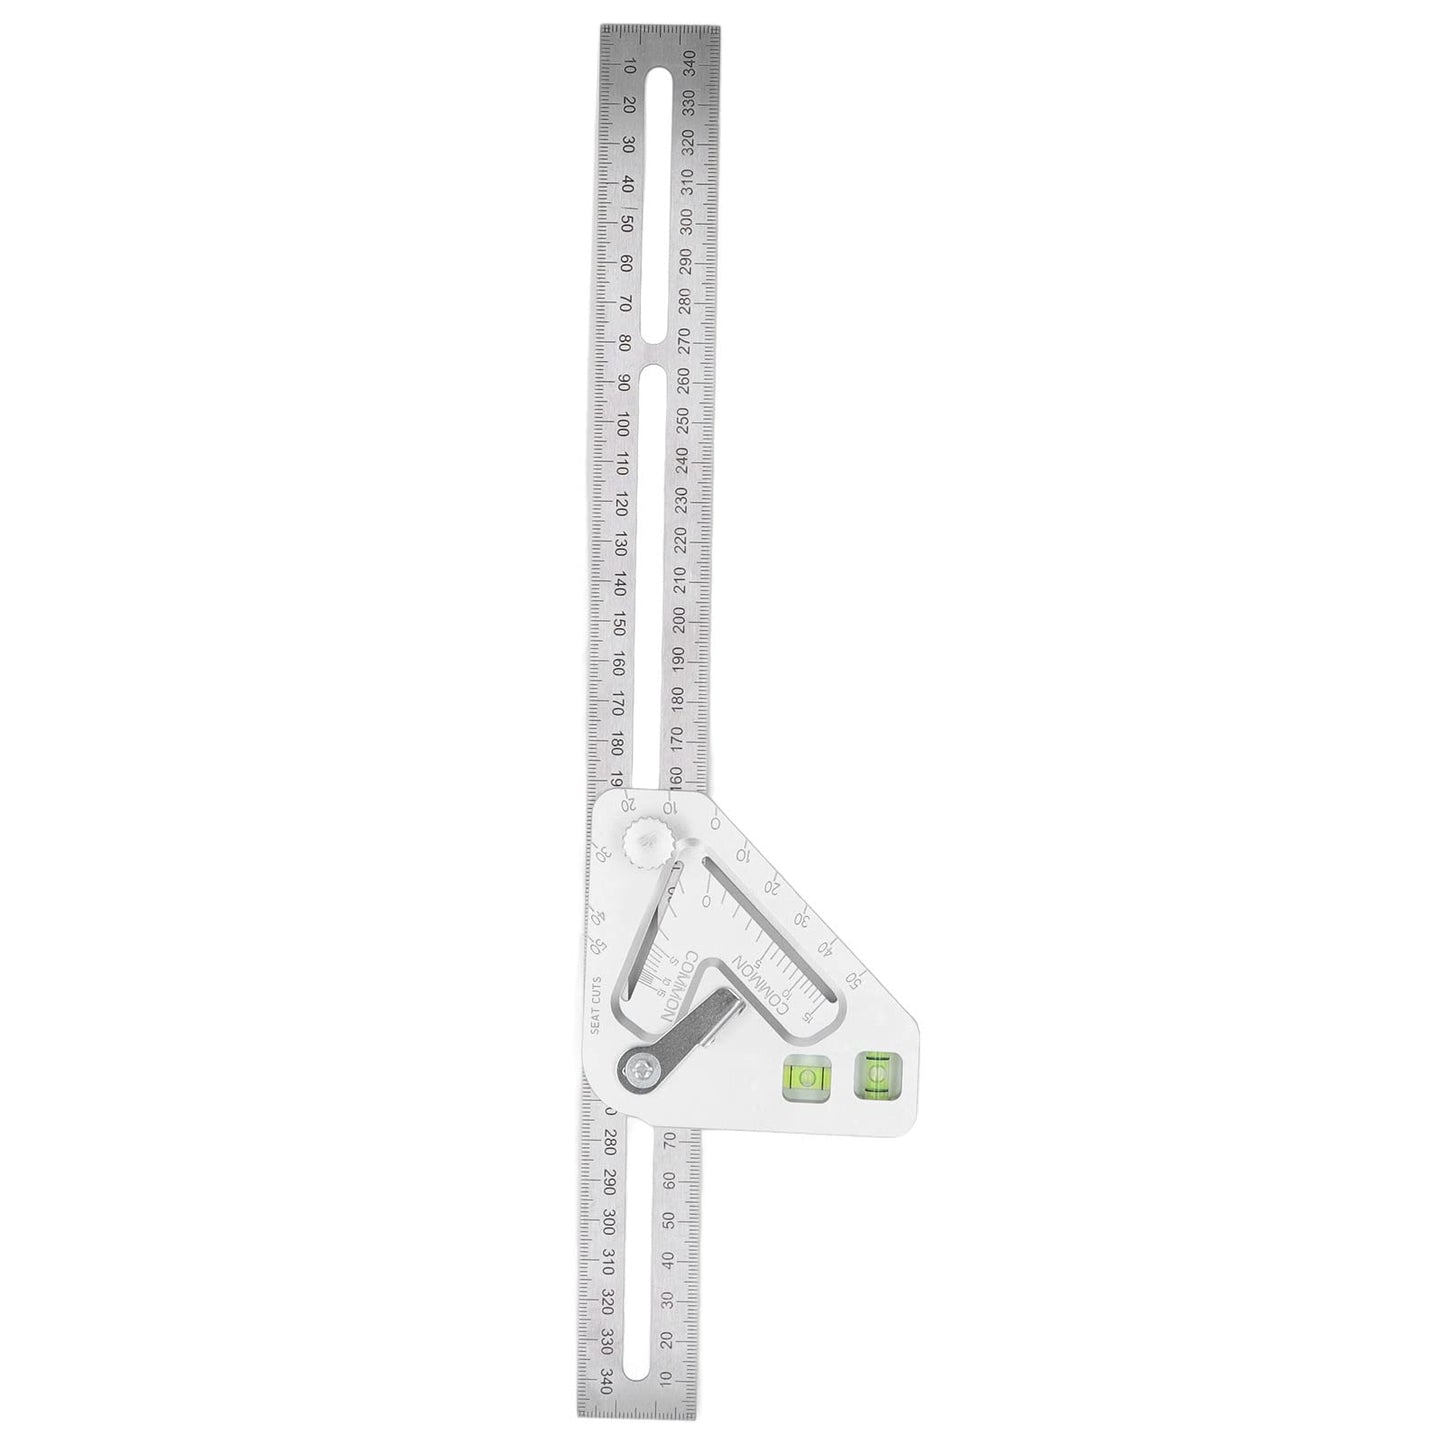 Combination Square with Bubble Level Silver Flexible Woodworking Triangle Ruler Carpentry Tools